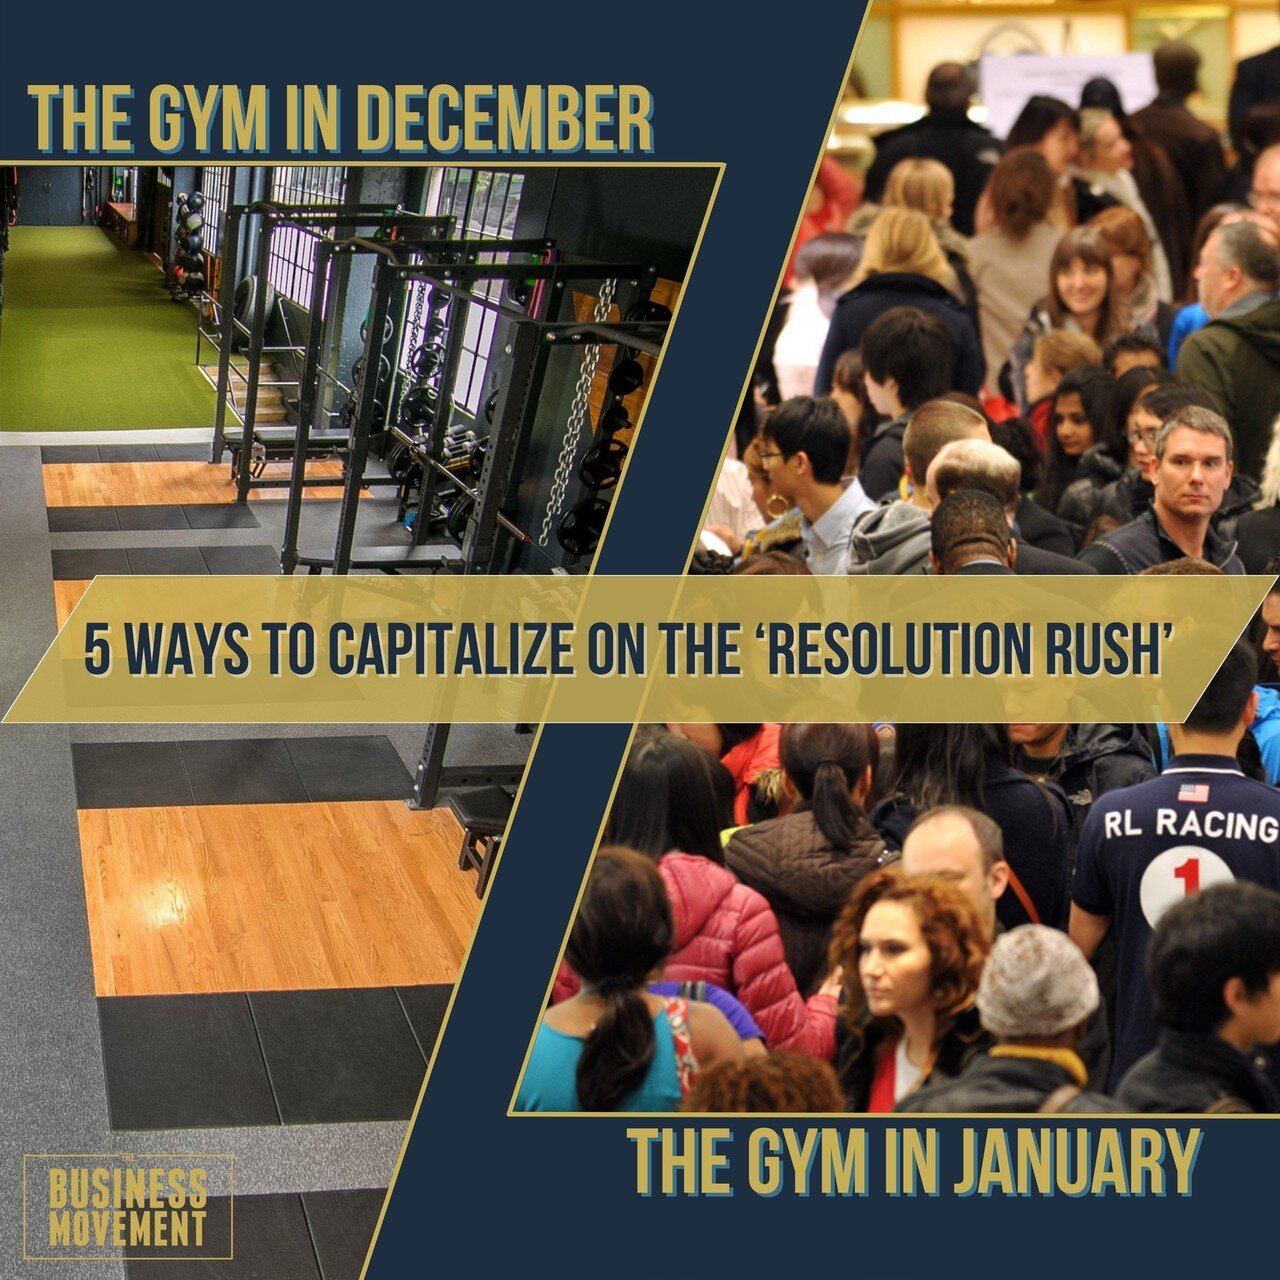 THE NEW YEAR'S FITBIZ MARKETING CHECKLIST⁠
⁠
The new year&rsquo;s rush is coming and if you and your marketing plan are not prepared to make the most of this crucial time of year, the &lsquo;resolution rush&rsquo; and the possible uptick of clients f